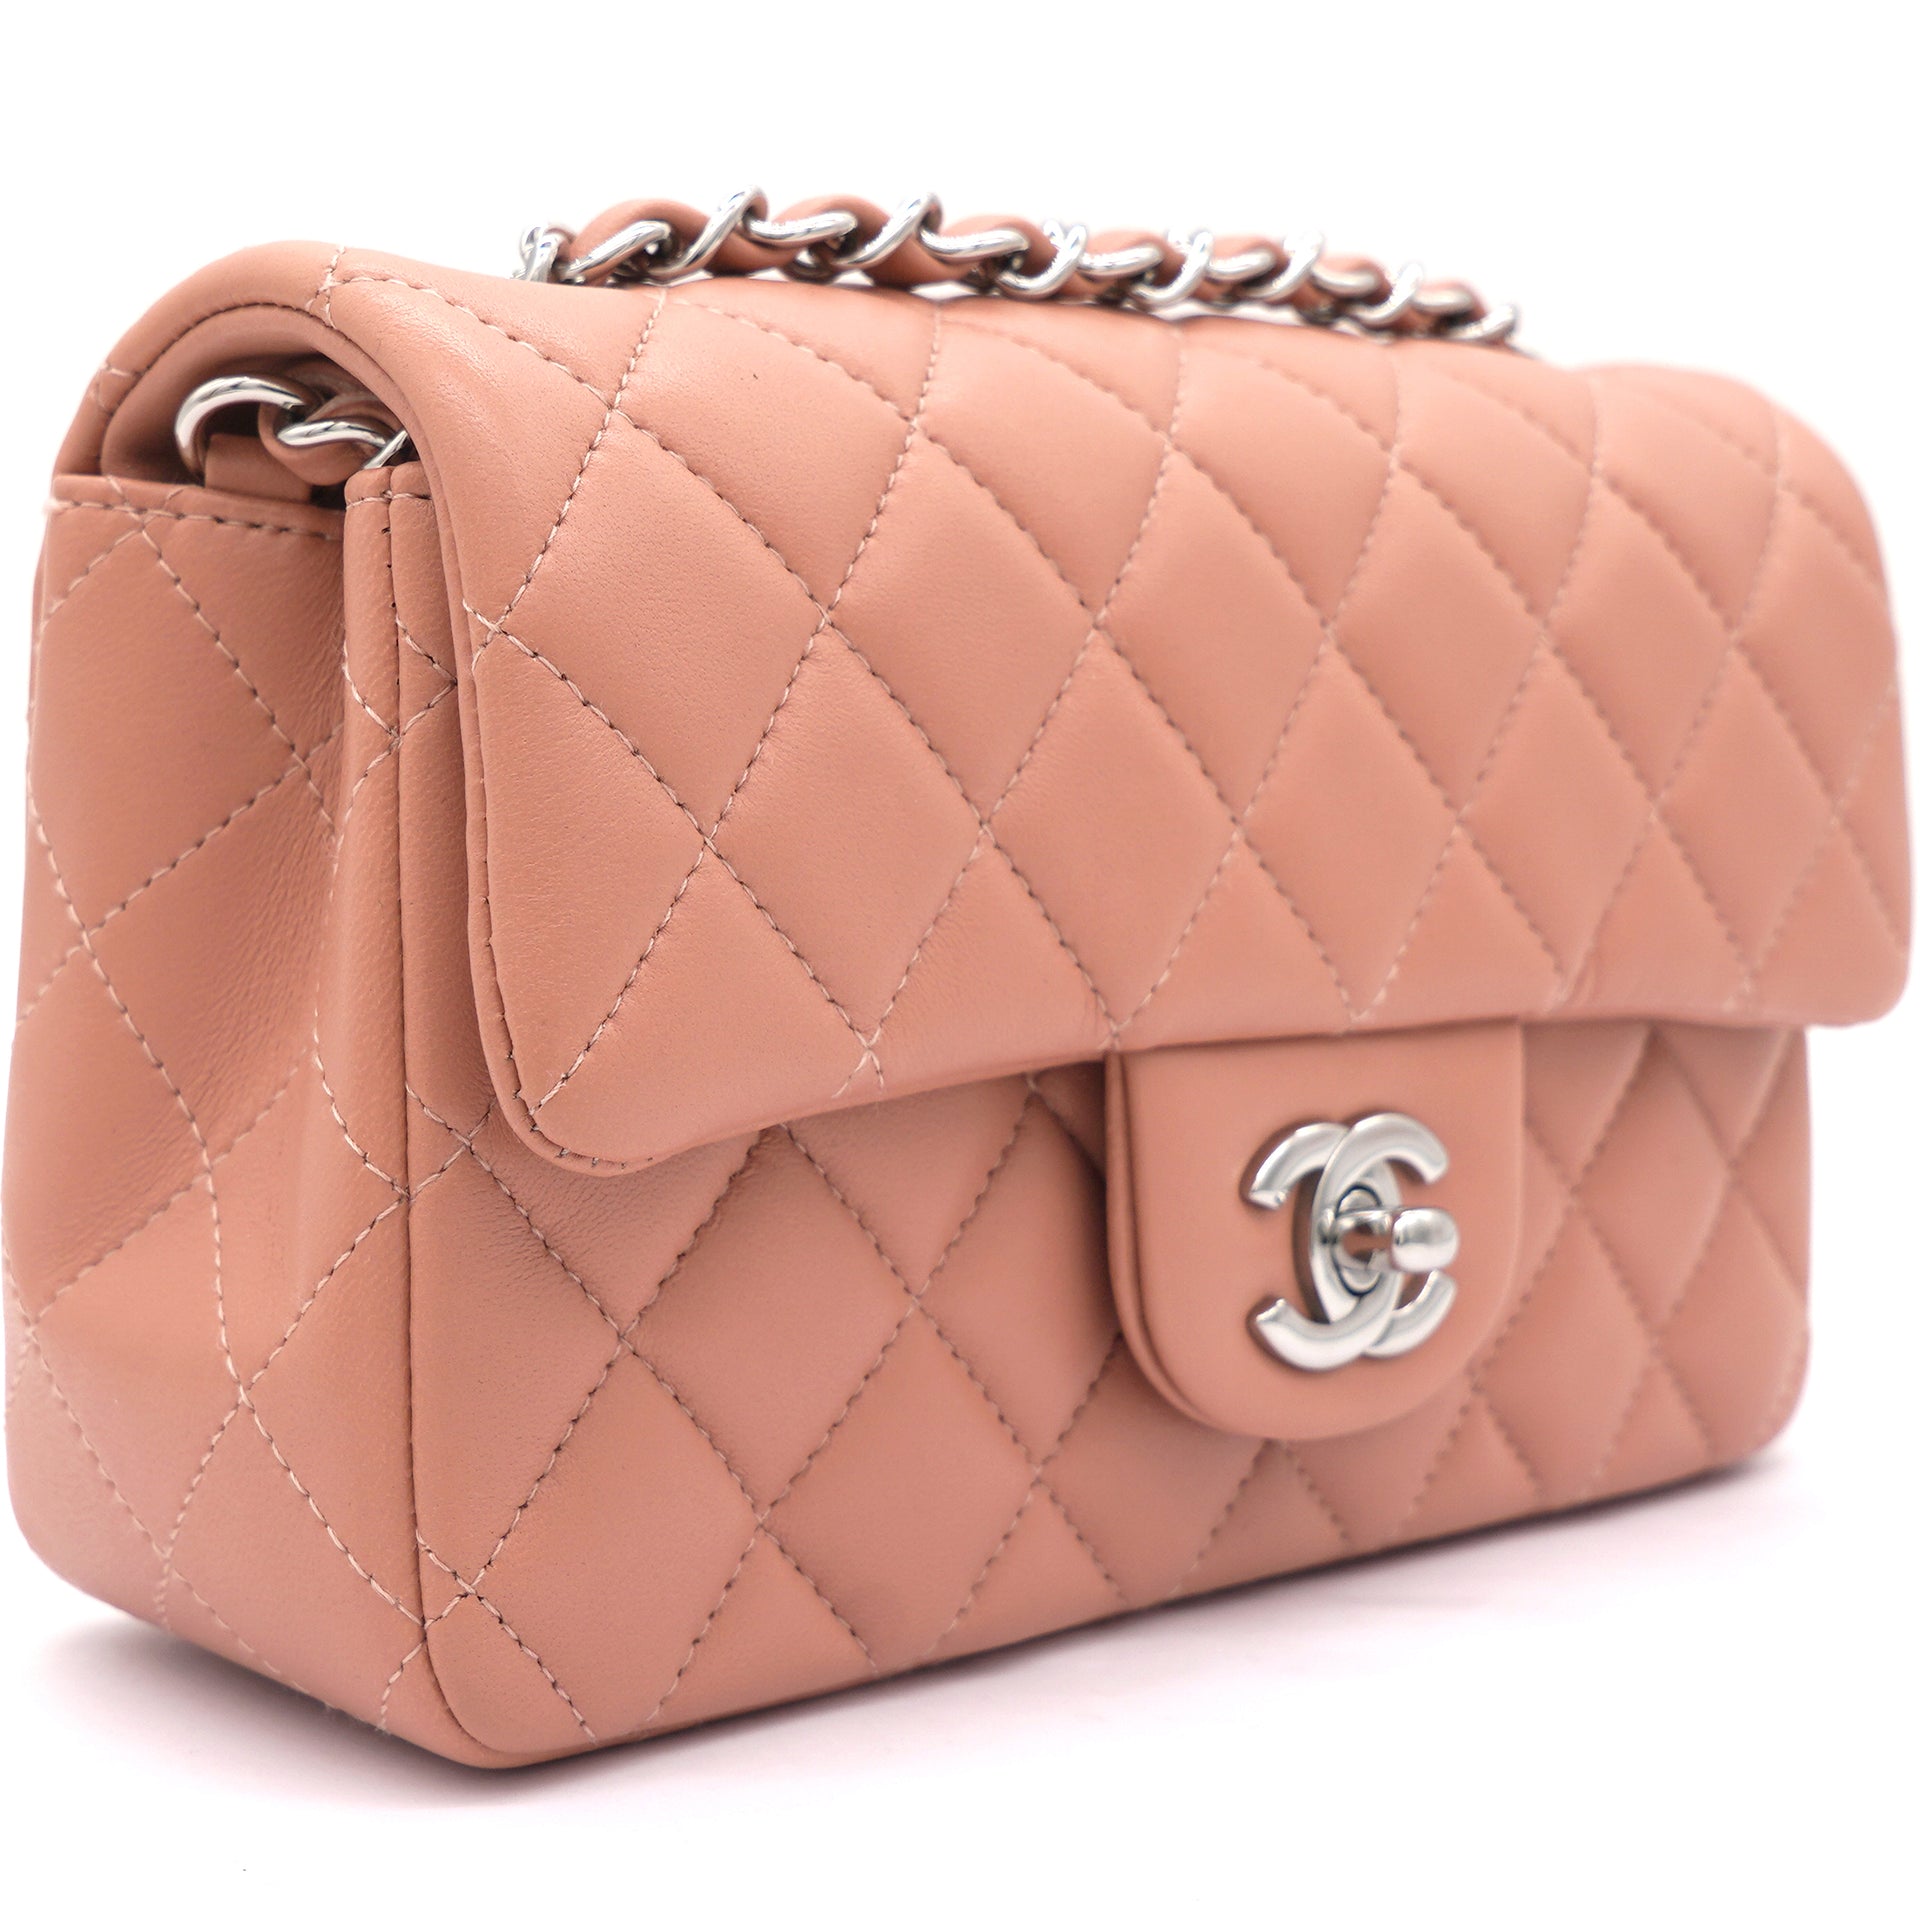 Authentic Chanel Lambskin Pink Leather Charms Mini Flap Crossbody Clutch Bag